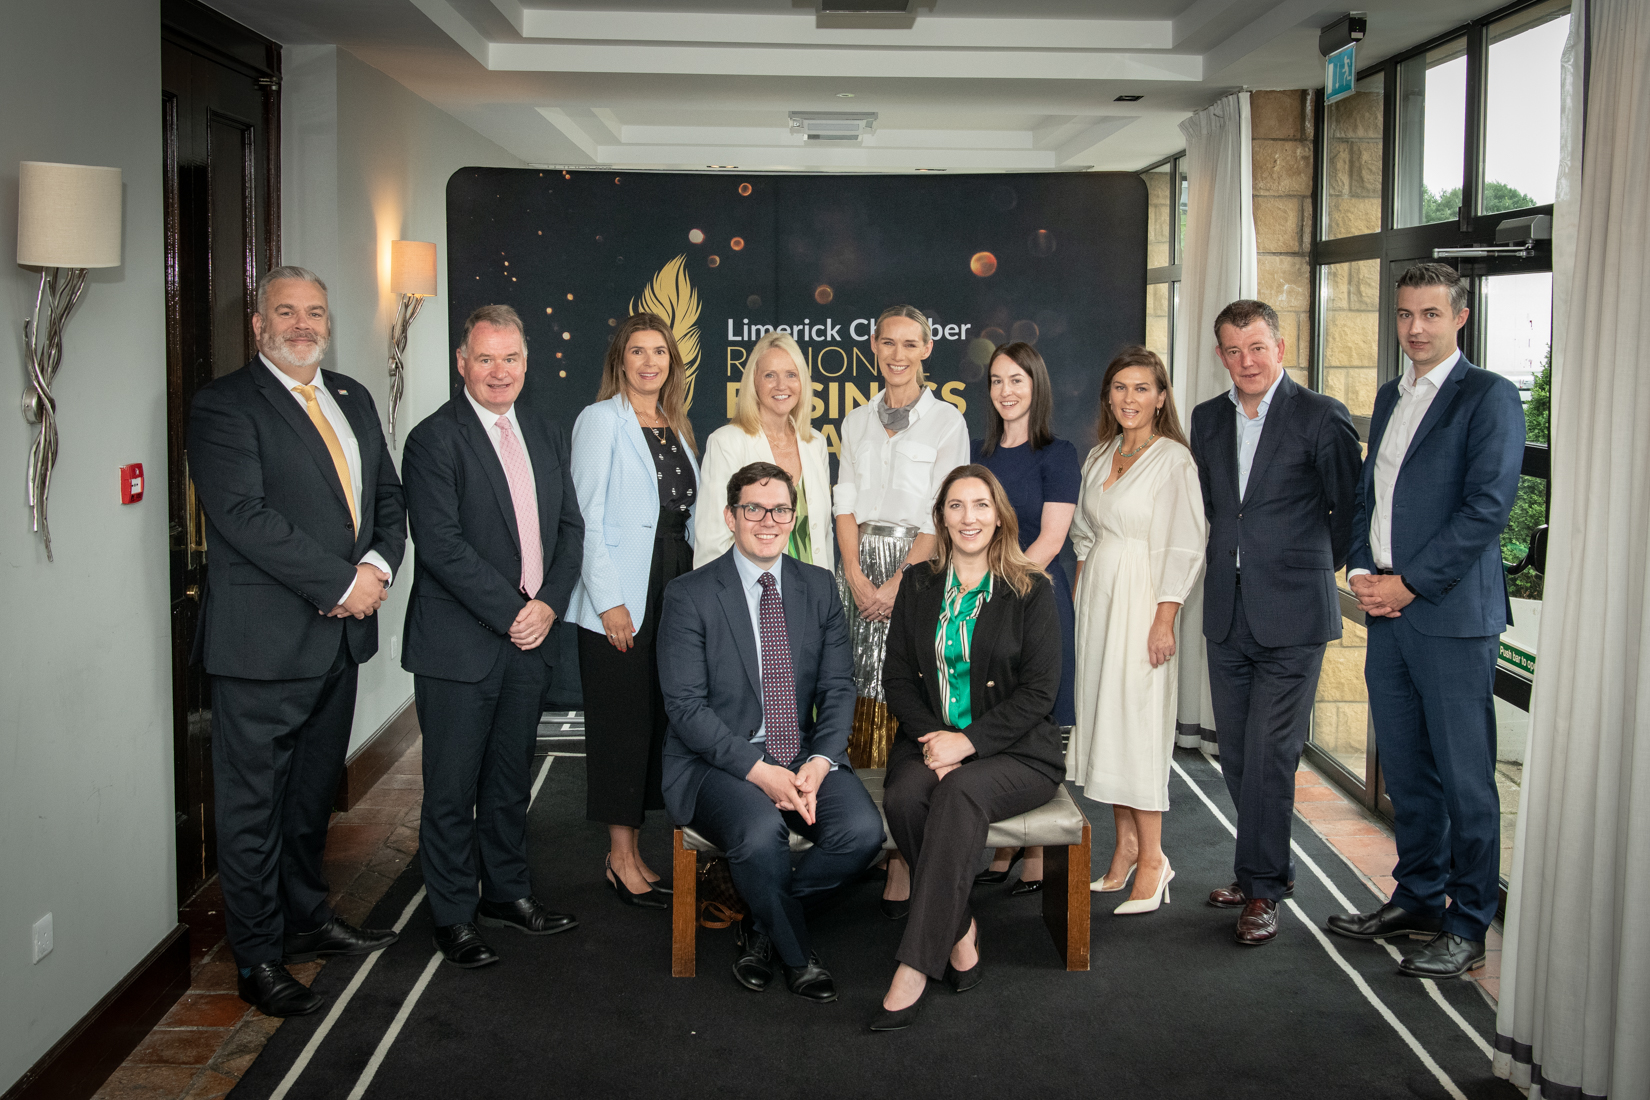 no repro fee: : Limerick Chamber Regional Awards 2023 Business Breakfast which was held in The Castletroy Hotel on the 23rd June. From left to right: Back Row: Noel Gavin - Northern Trust, Pat Piggott - AIB, Lisa Killeen - HOMS, Nadi O’Sullivan - The Shannon Airport Group, Dee Ryan - CEO / Limerick Chamber, Gemma Harte - BDO, Leenanne Storan - EY, Gramham Burns - CPL, Rory Corbett - Limerick City and County Council. Front Row:: Michael MacCurtain - Limerick Chamber Skillnet, Gillan Barry - TUS. All mention are Limerick Chamber Business Award sponsors.